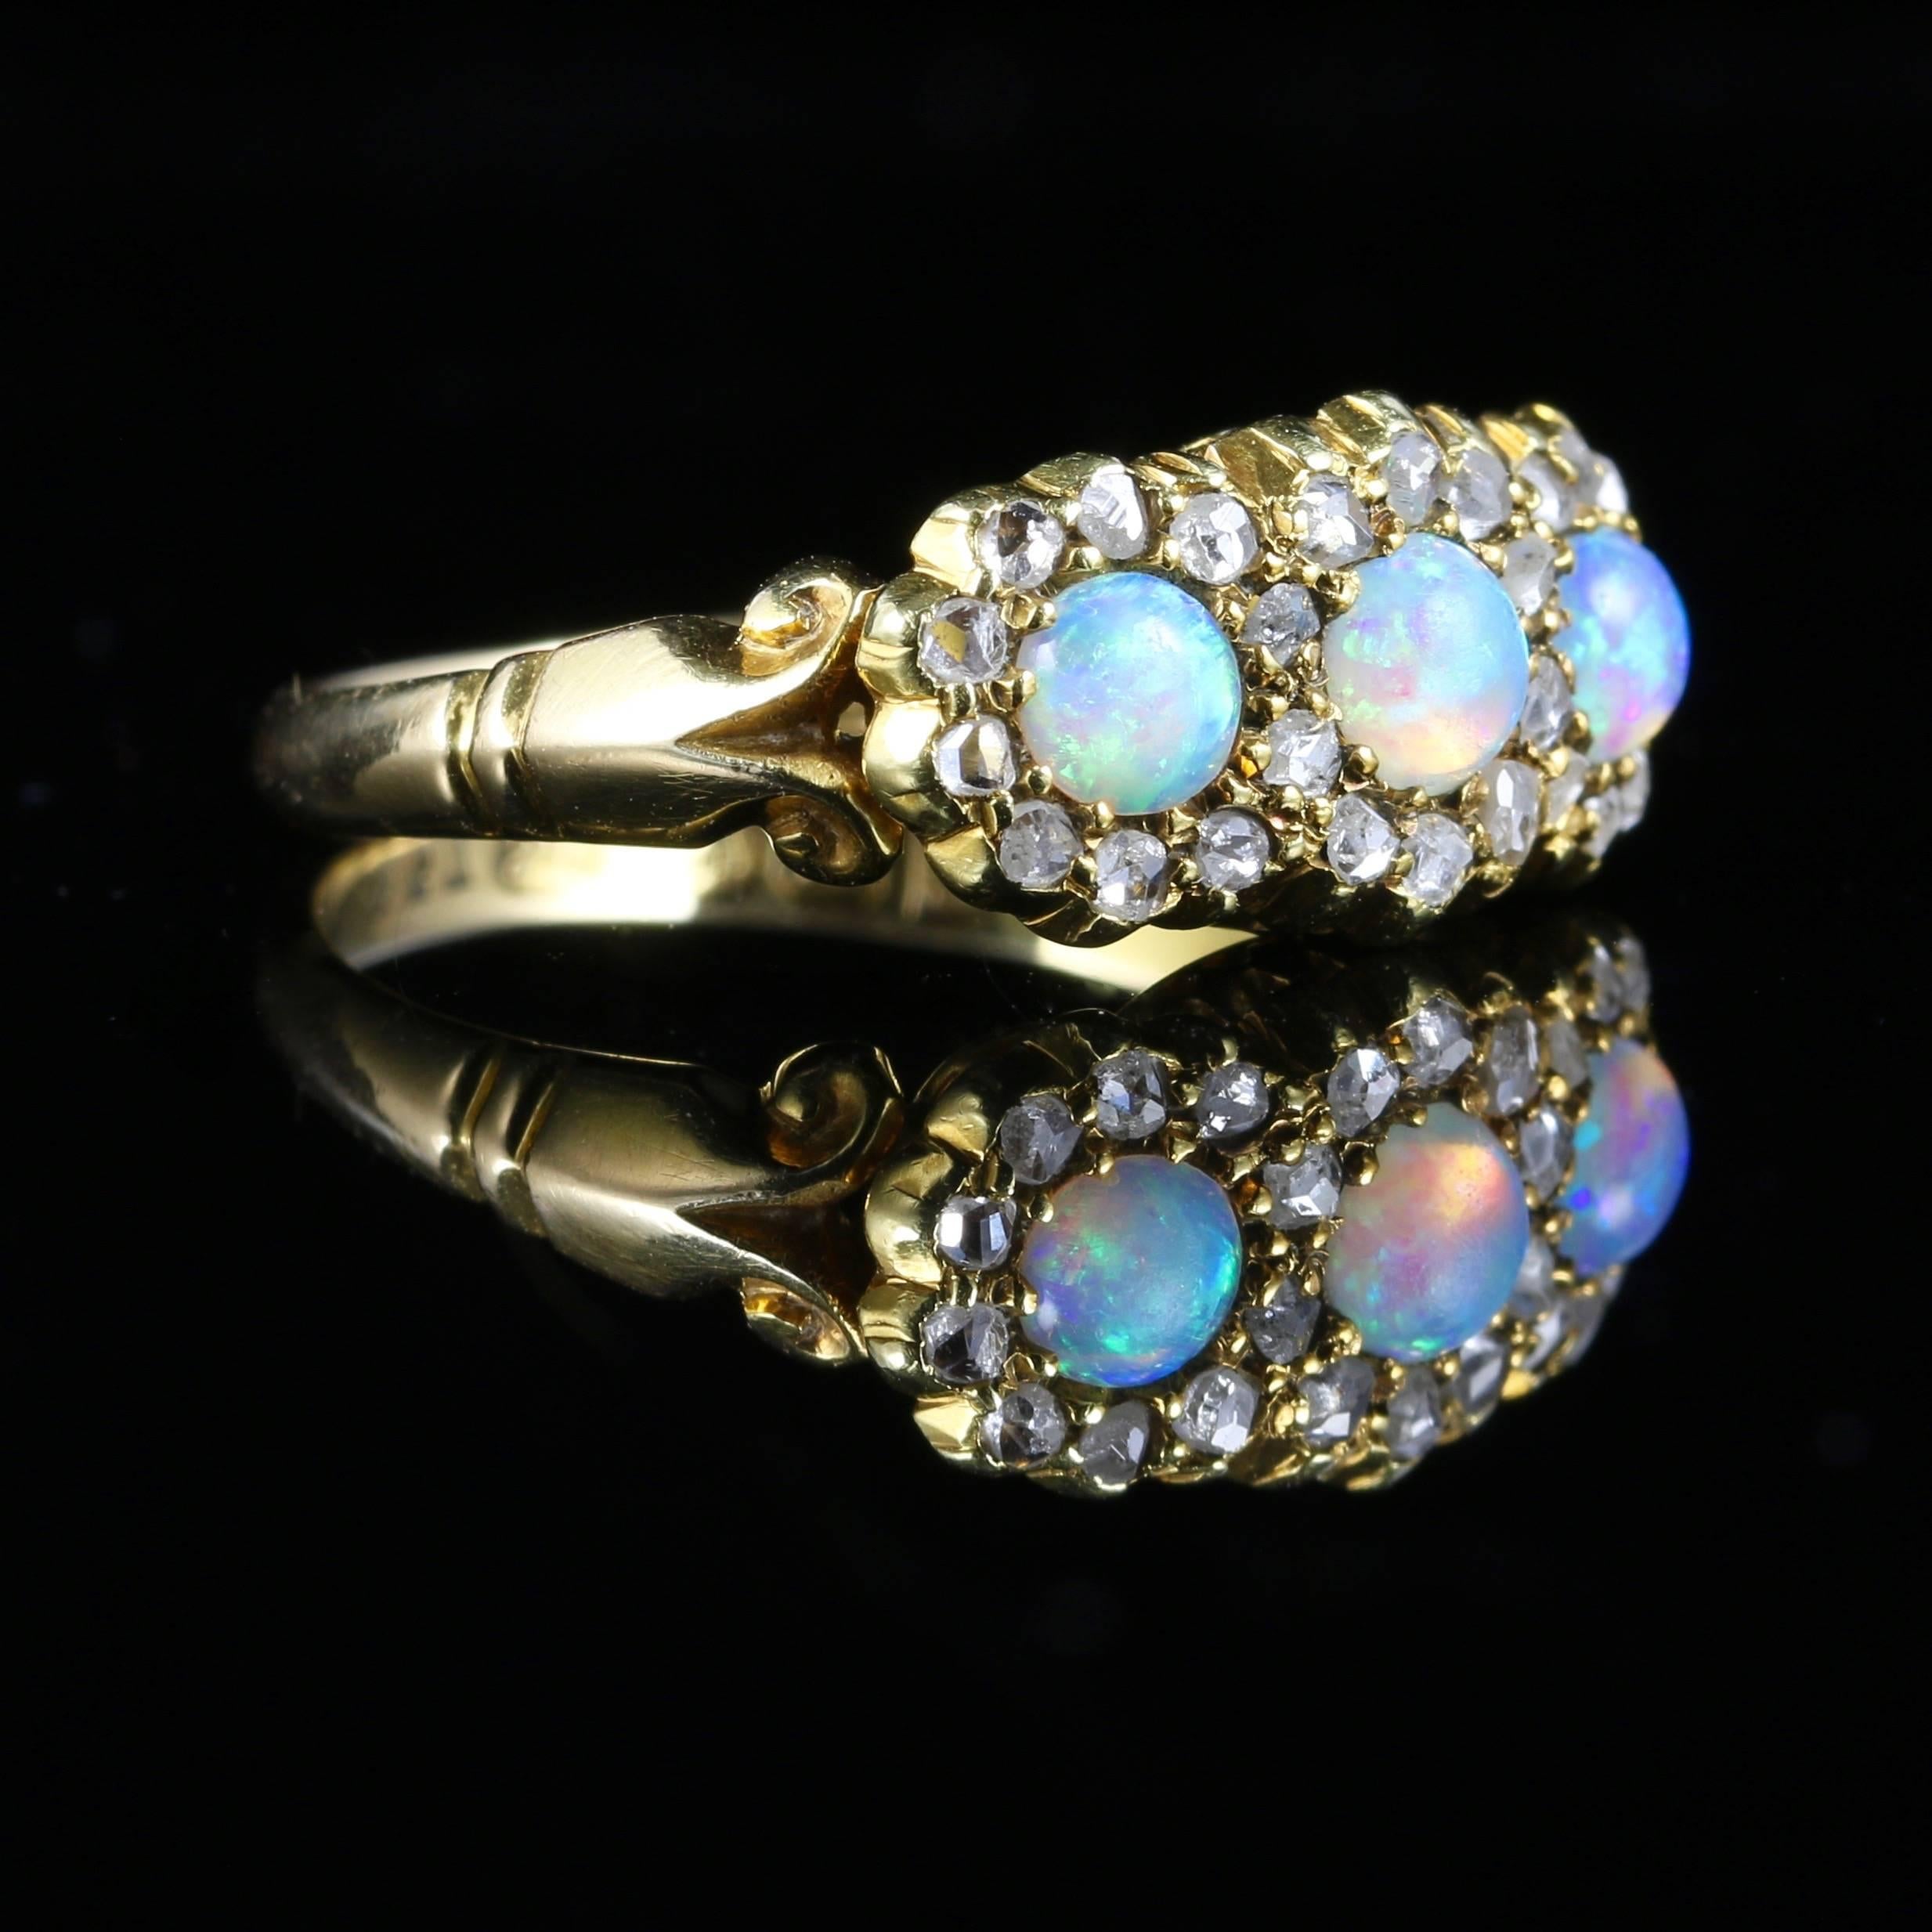 This wonderful Antique 18ct Victorian Opal and Diamond ring boasts three natural Opal gemstones that are truly stunning across the centre. 

This is a genuine original Antique ring set in 18ct yellow gold with Chester Hallmark. 

The Opals are a